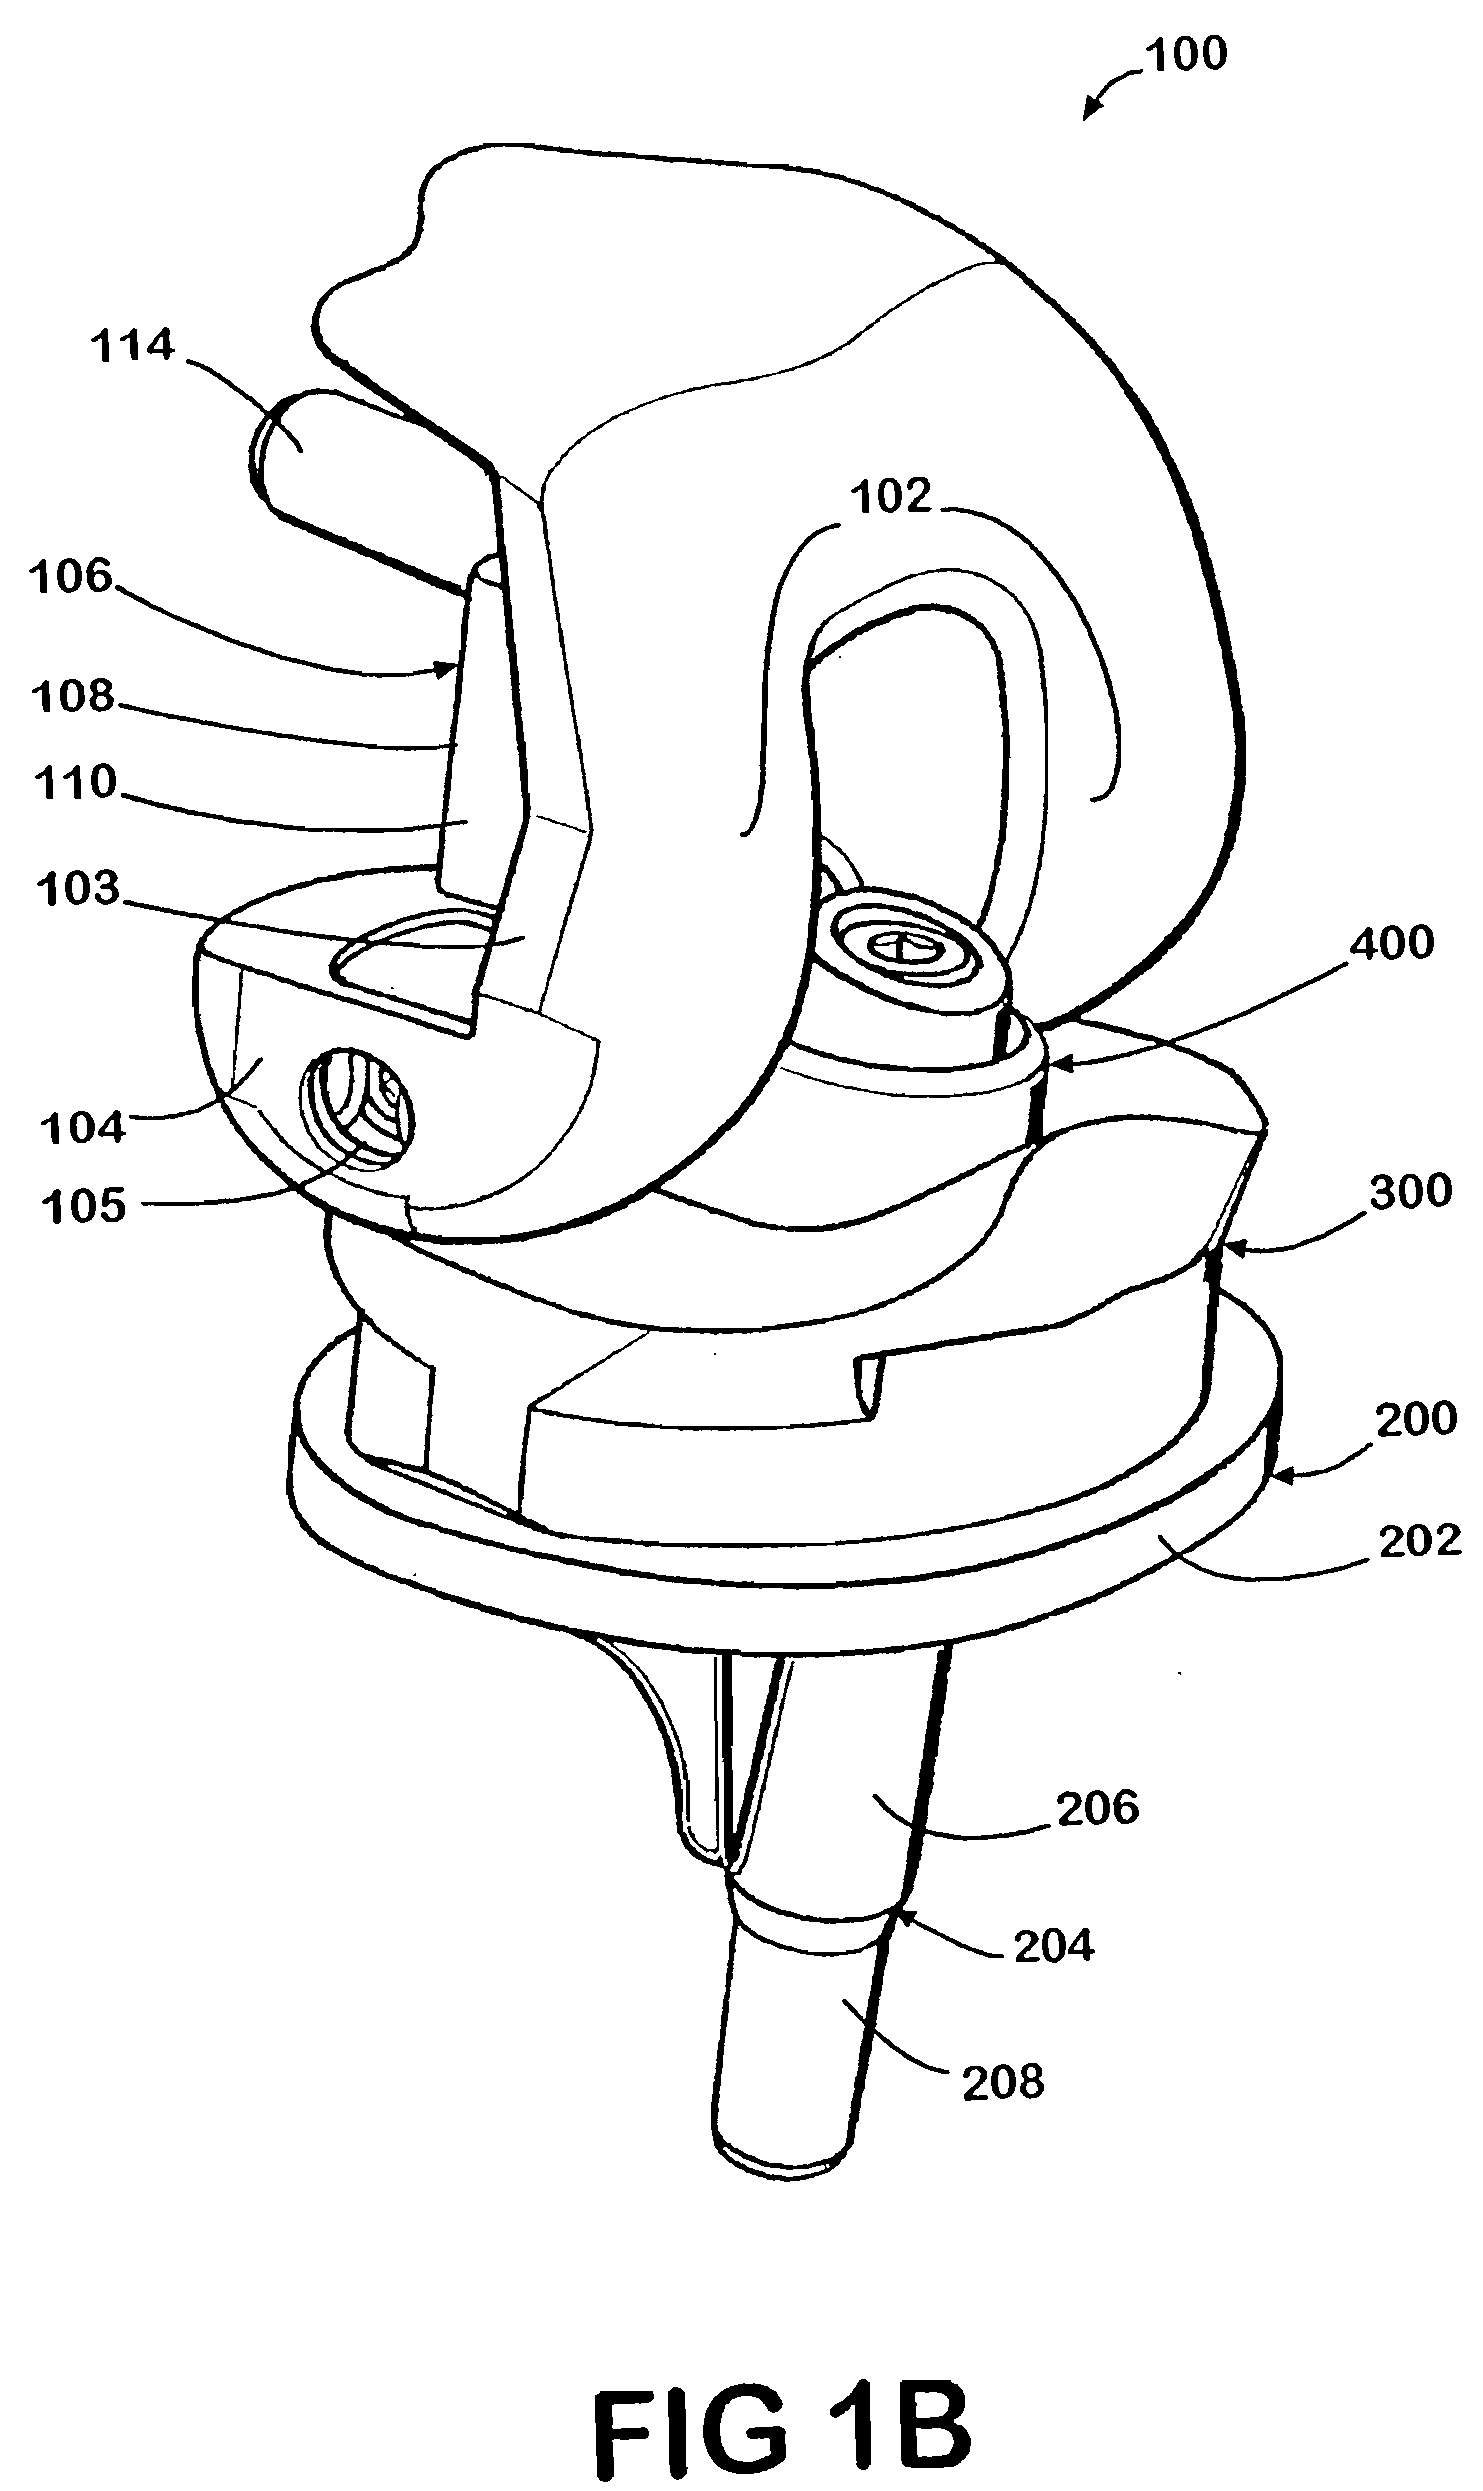 Hinged joint system